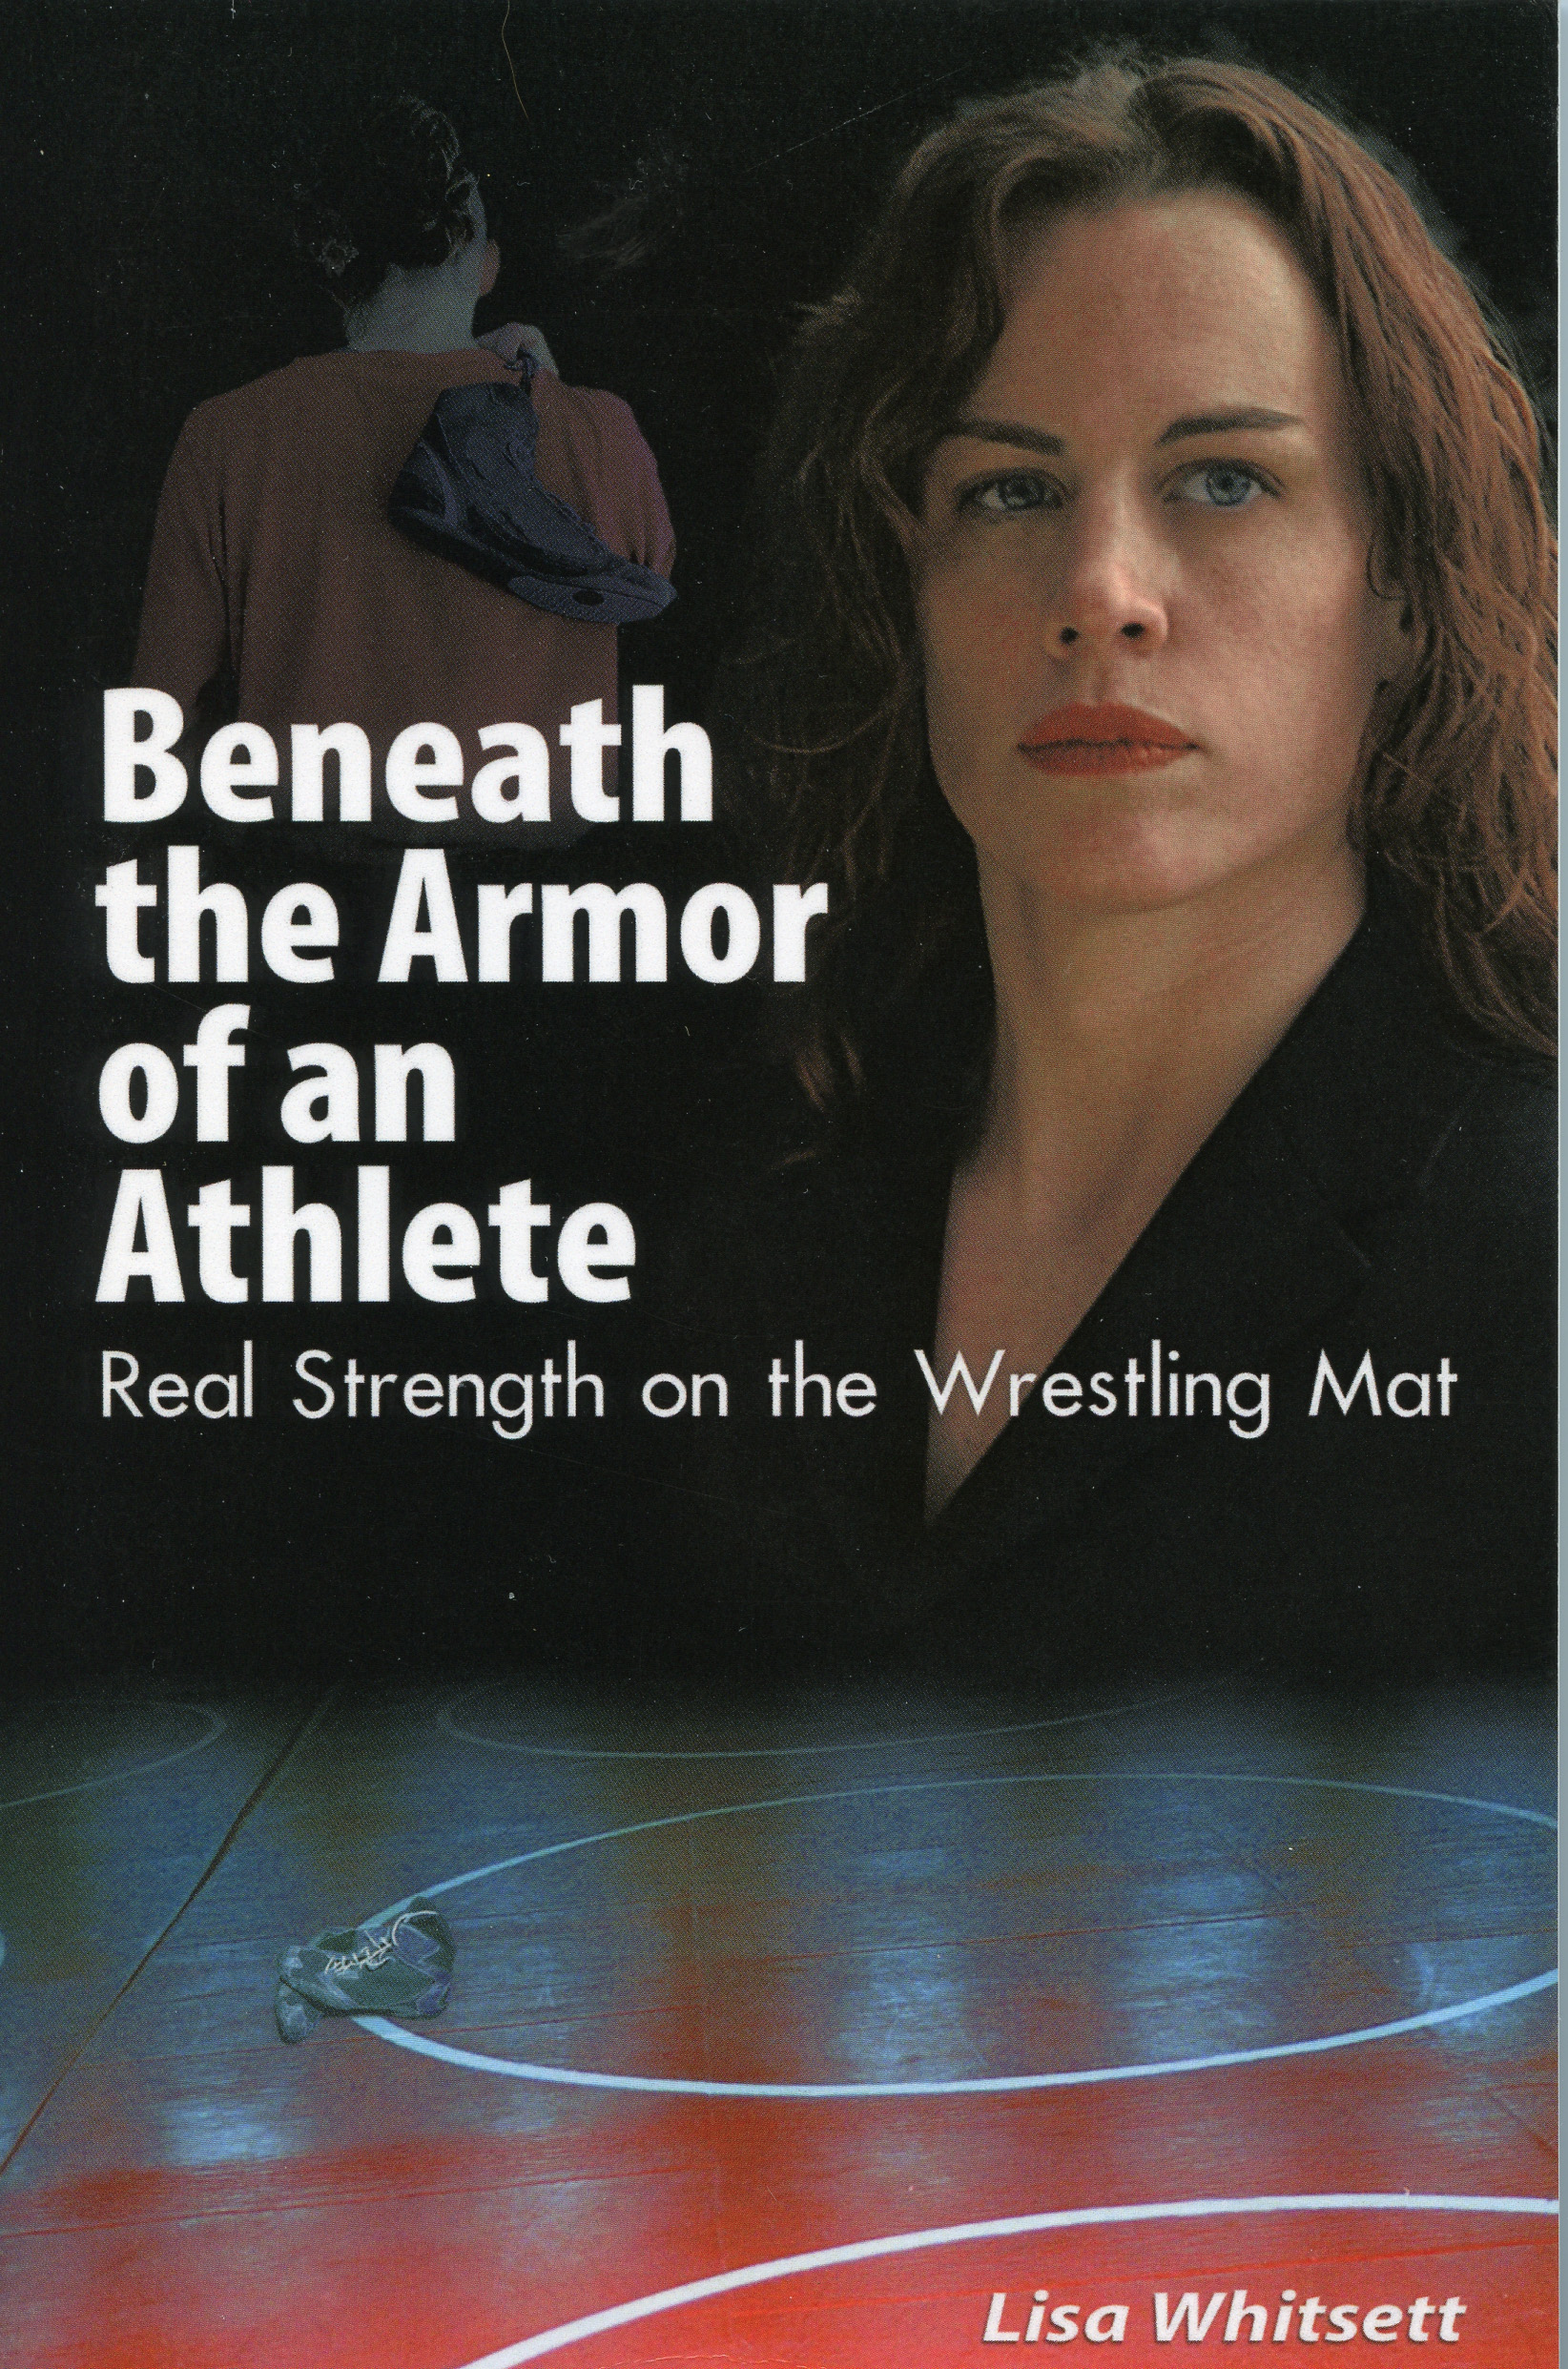 "This searing confessional reads like a novel and is just as suspenseful... Any female athlete would be interested in this story." -- Library Journal

by Lisa Whitsett
ISBN: 978-4-930546-63-9
$16.95
Published in 2003